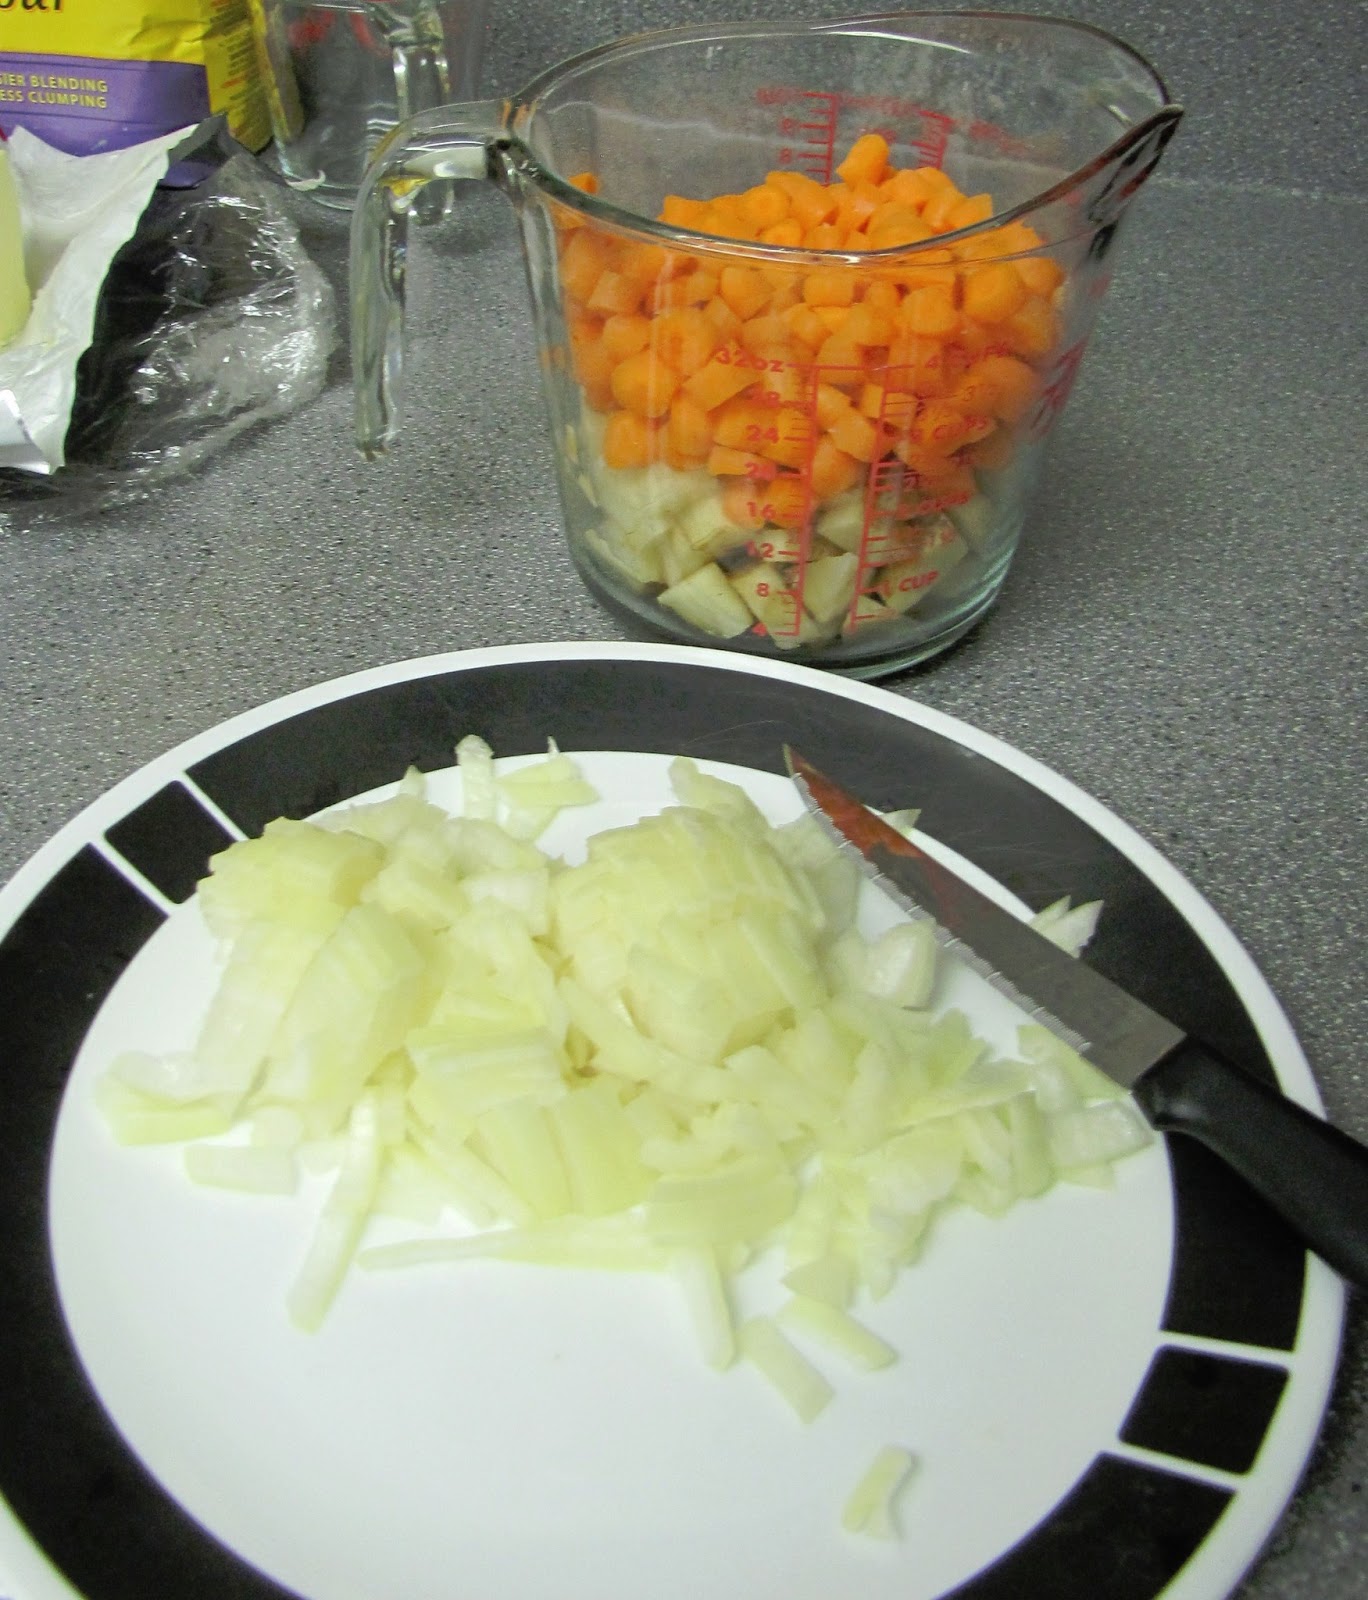 Chop up your carrots, potatoes and onions